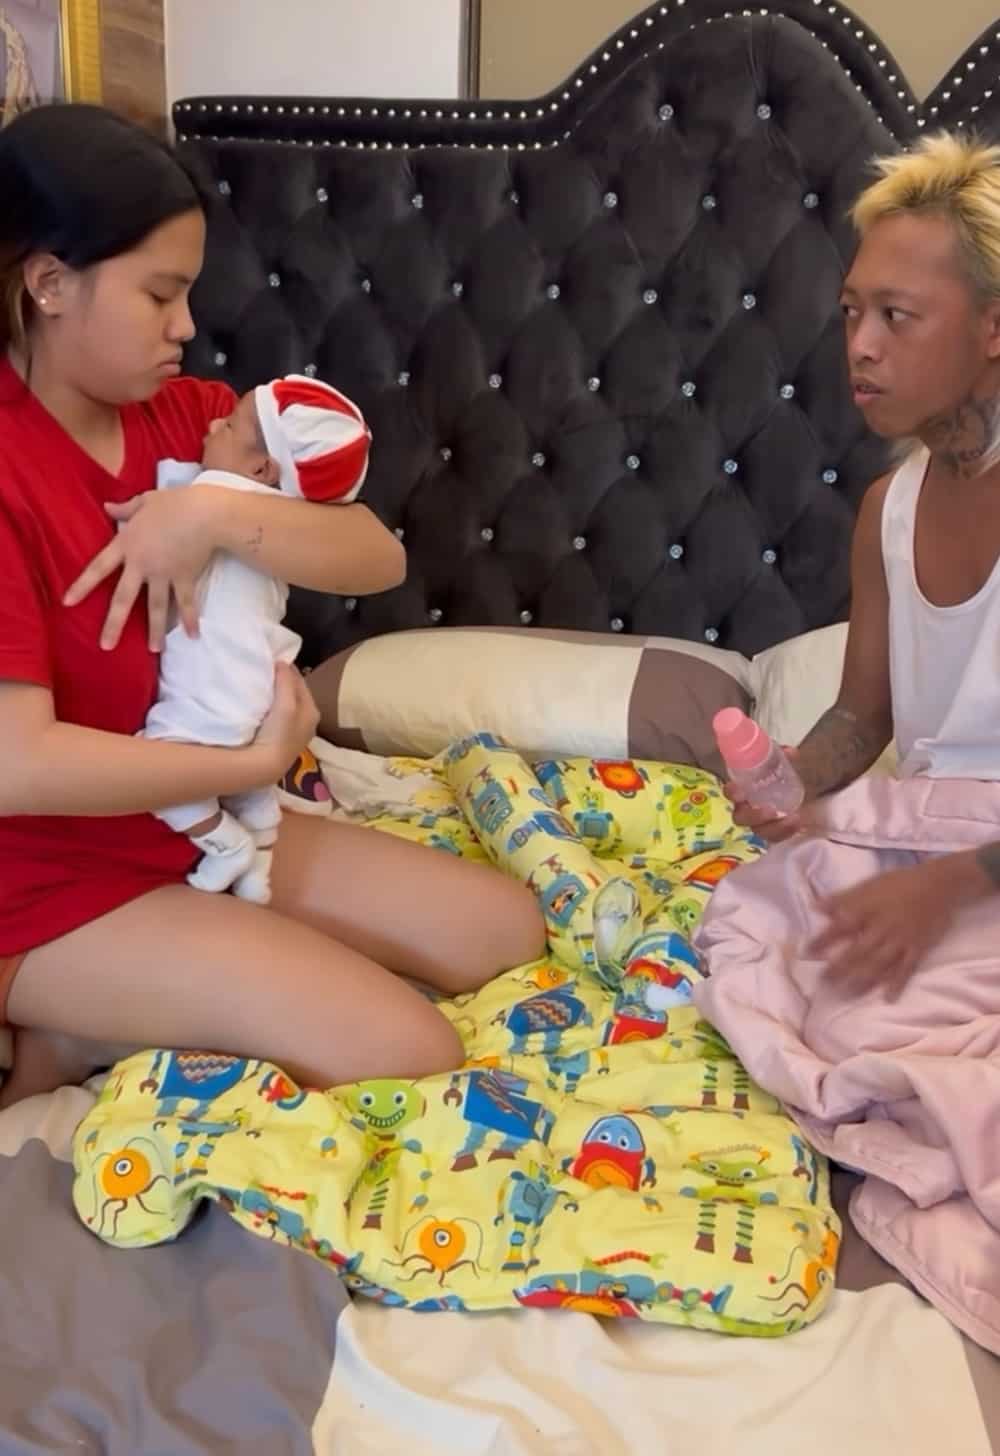 Whamos and Antonette’s “mommy vs daddy” video with Baby Meteor goes viral